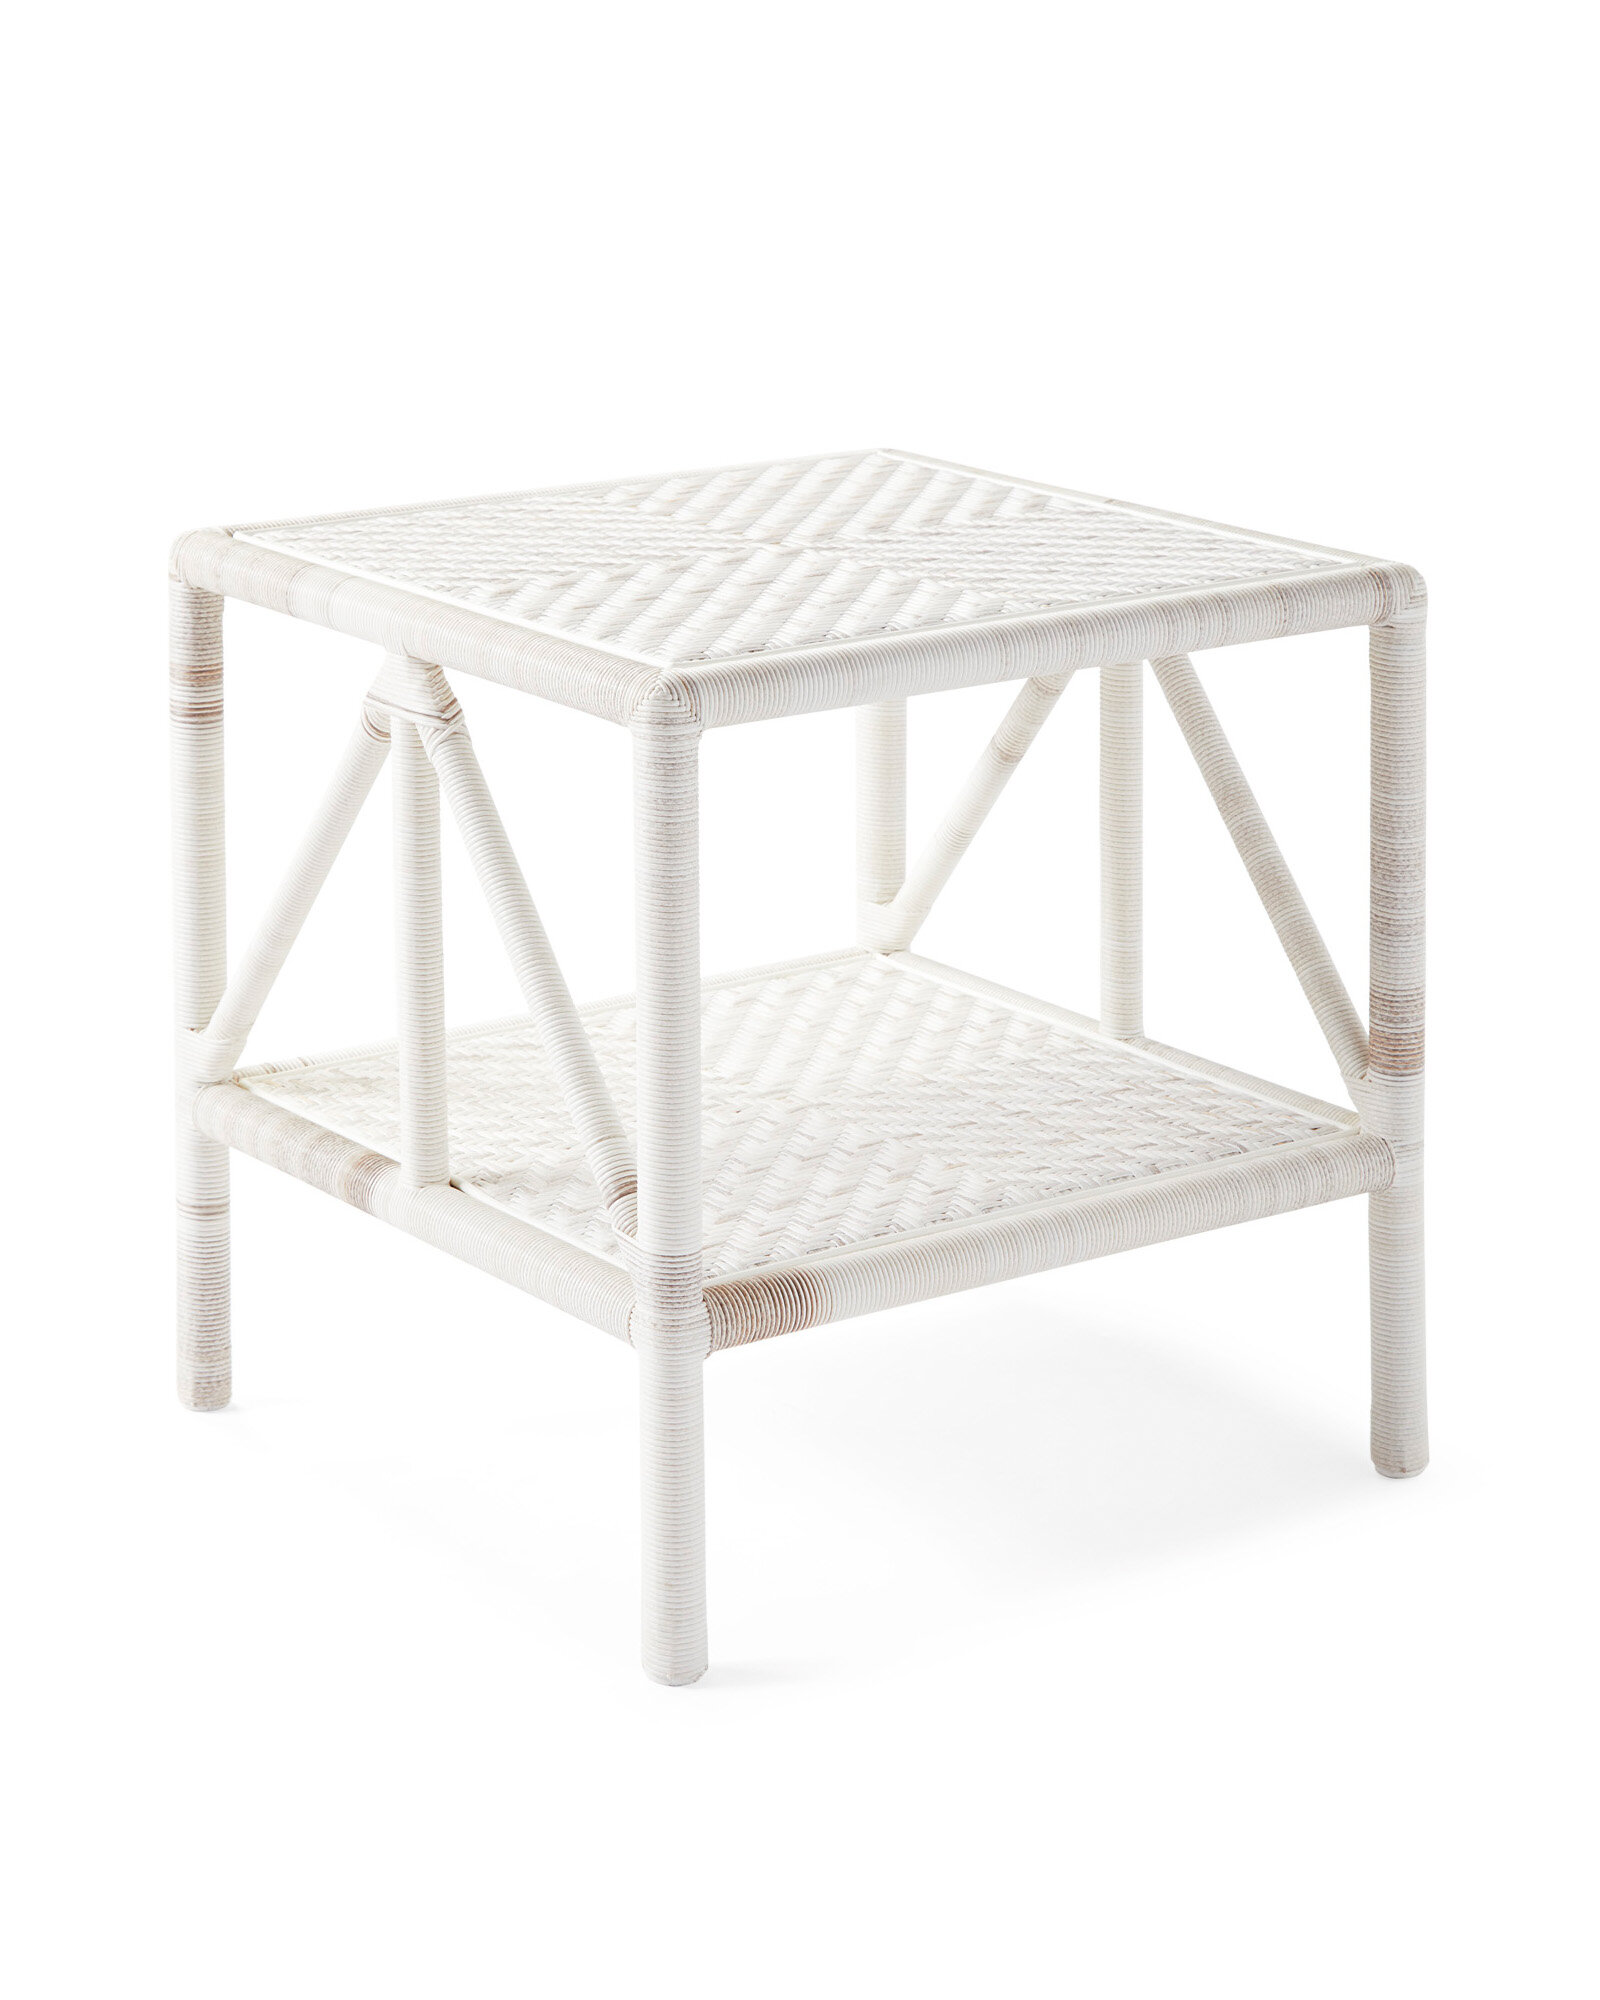 Trestle Outdoor Side Table